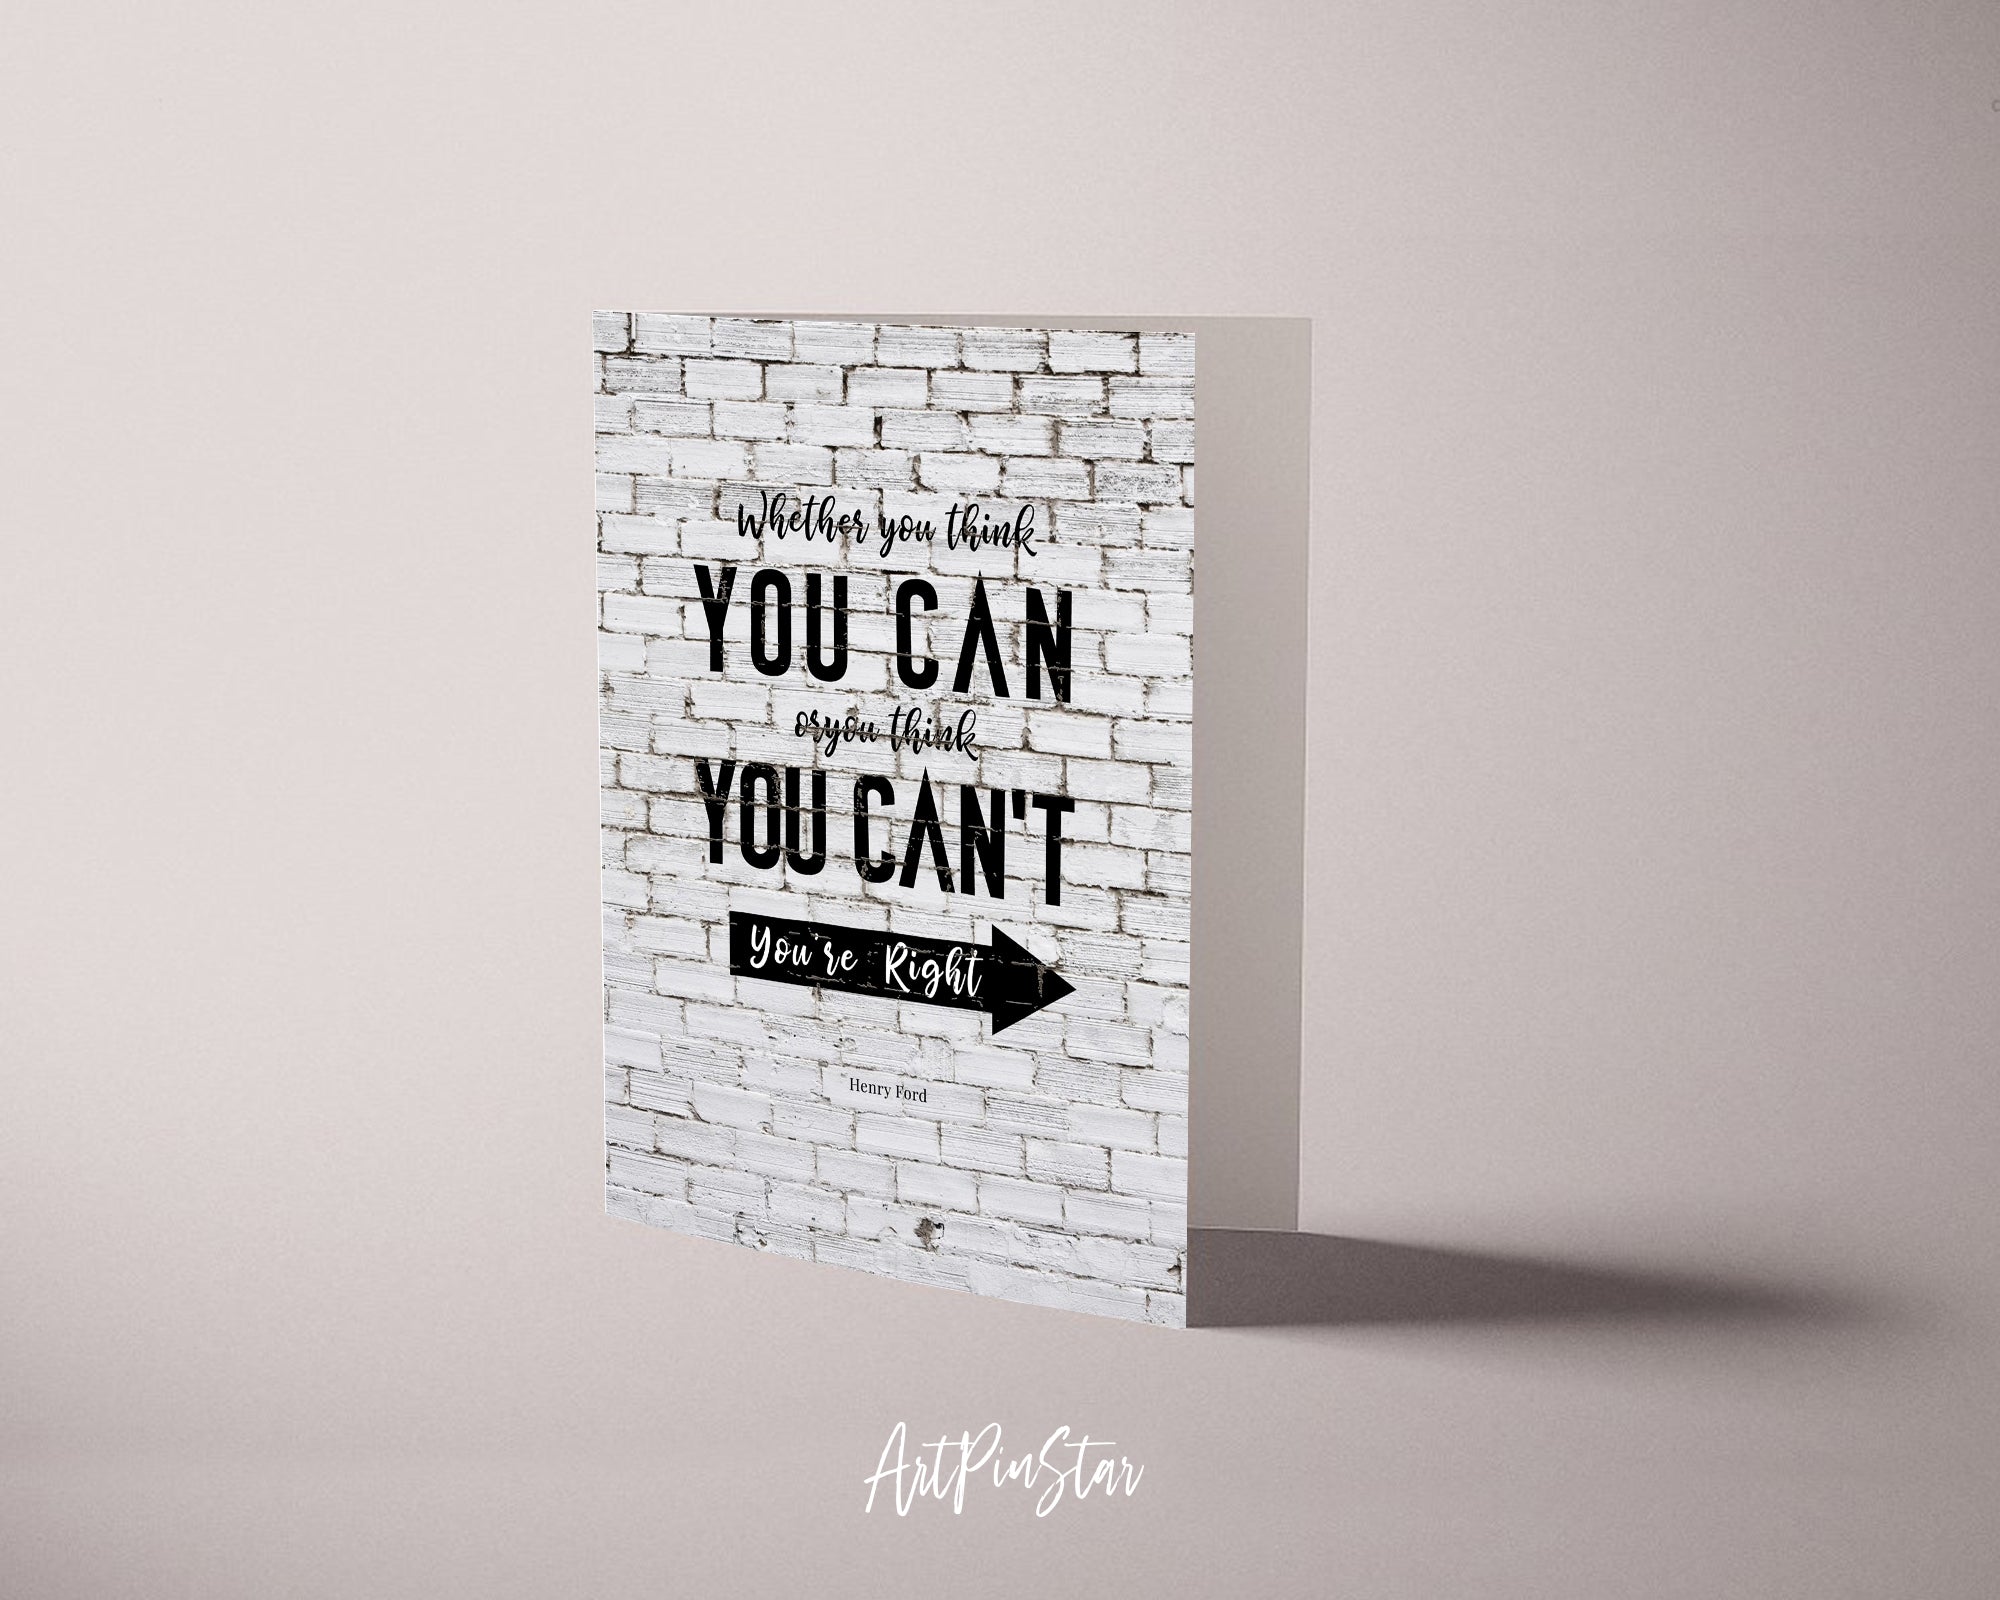 Whether you think you can Henry Ford Motivational Customized Greeting Card